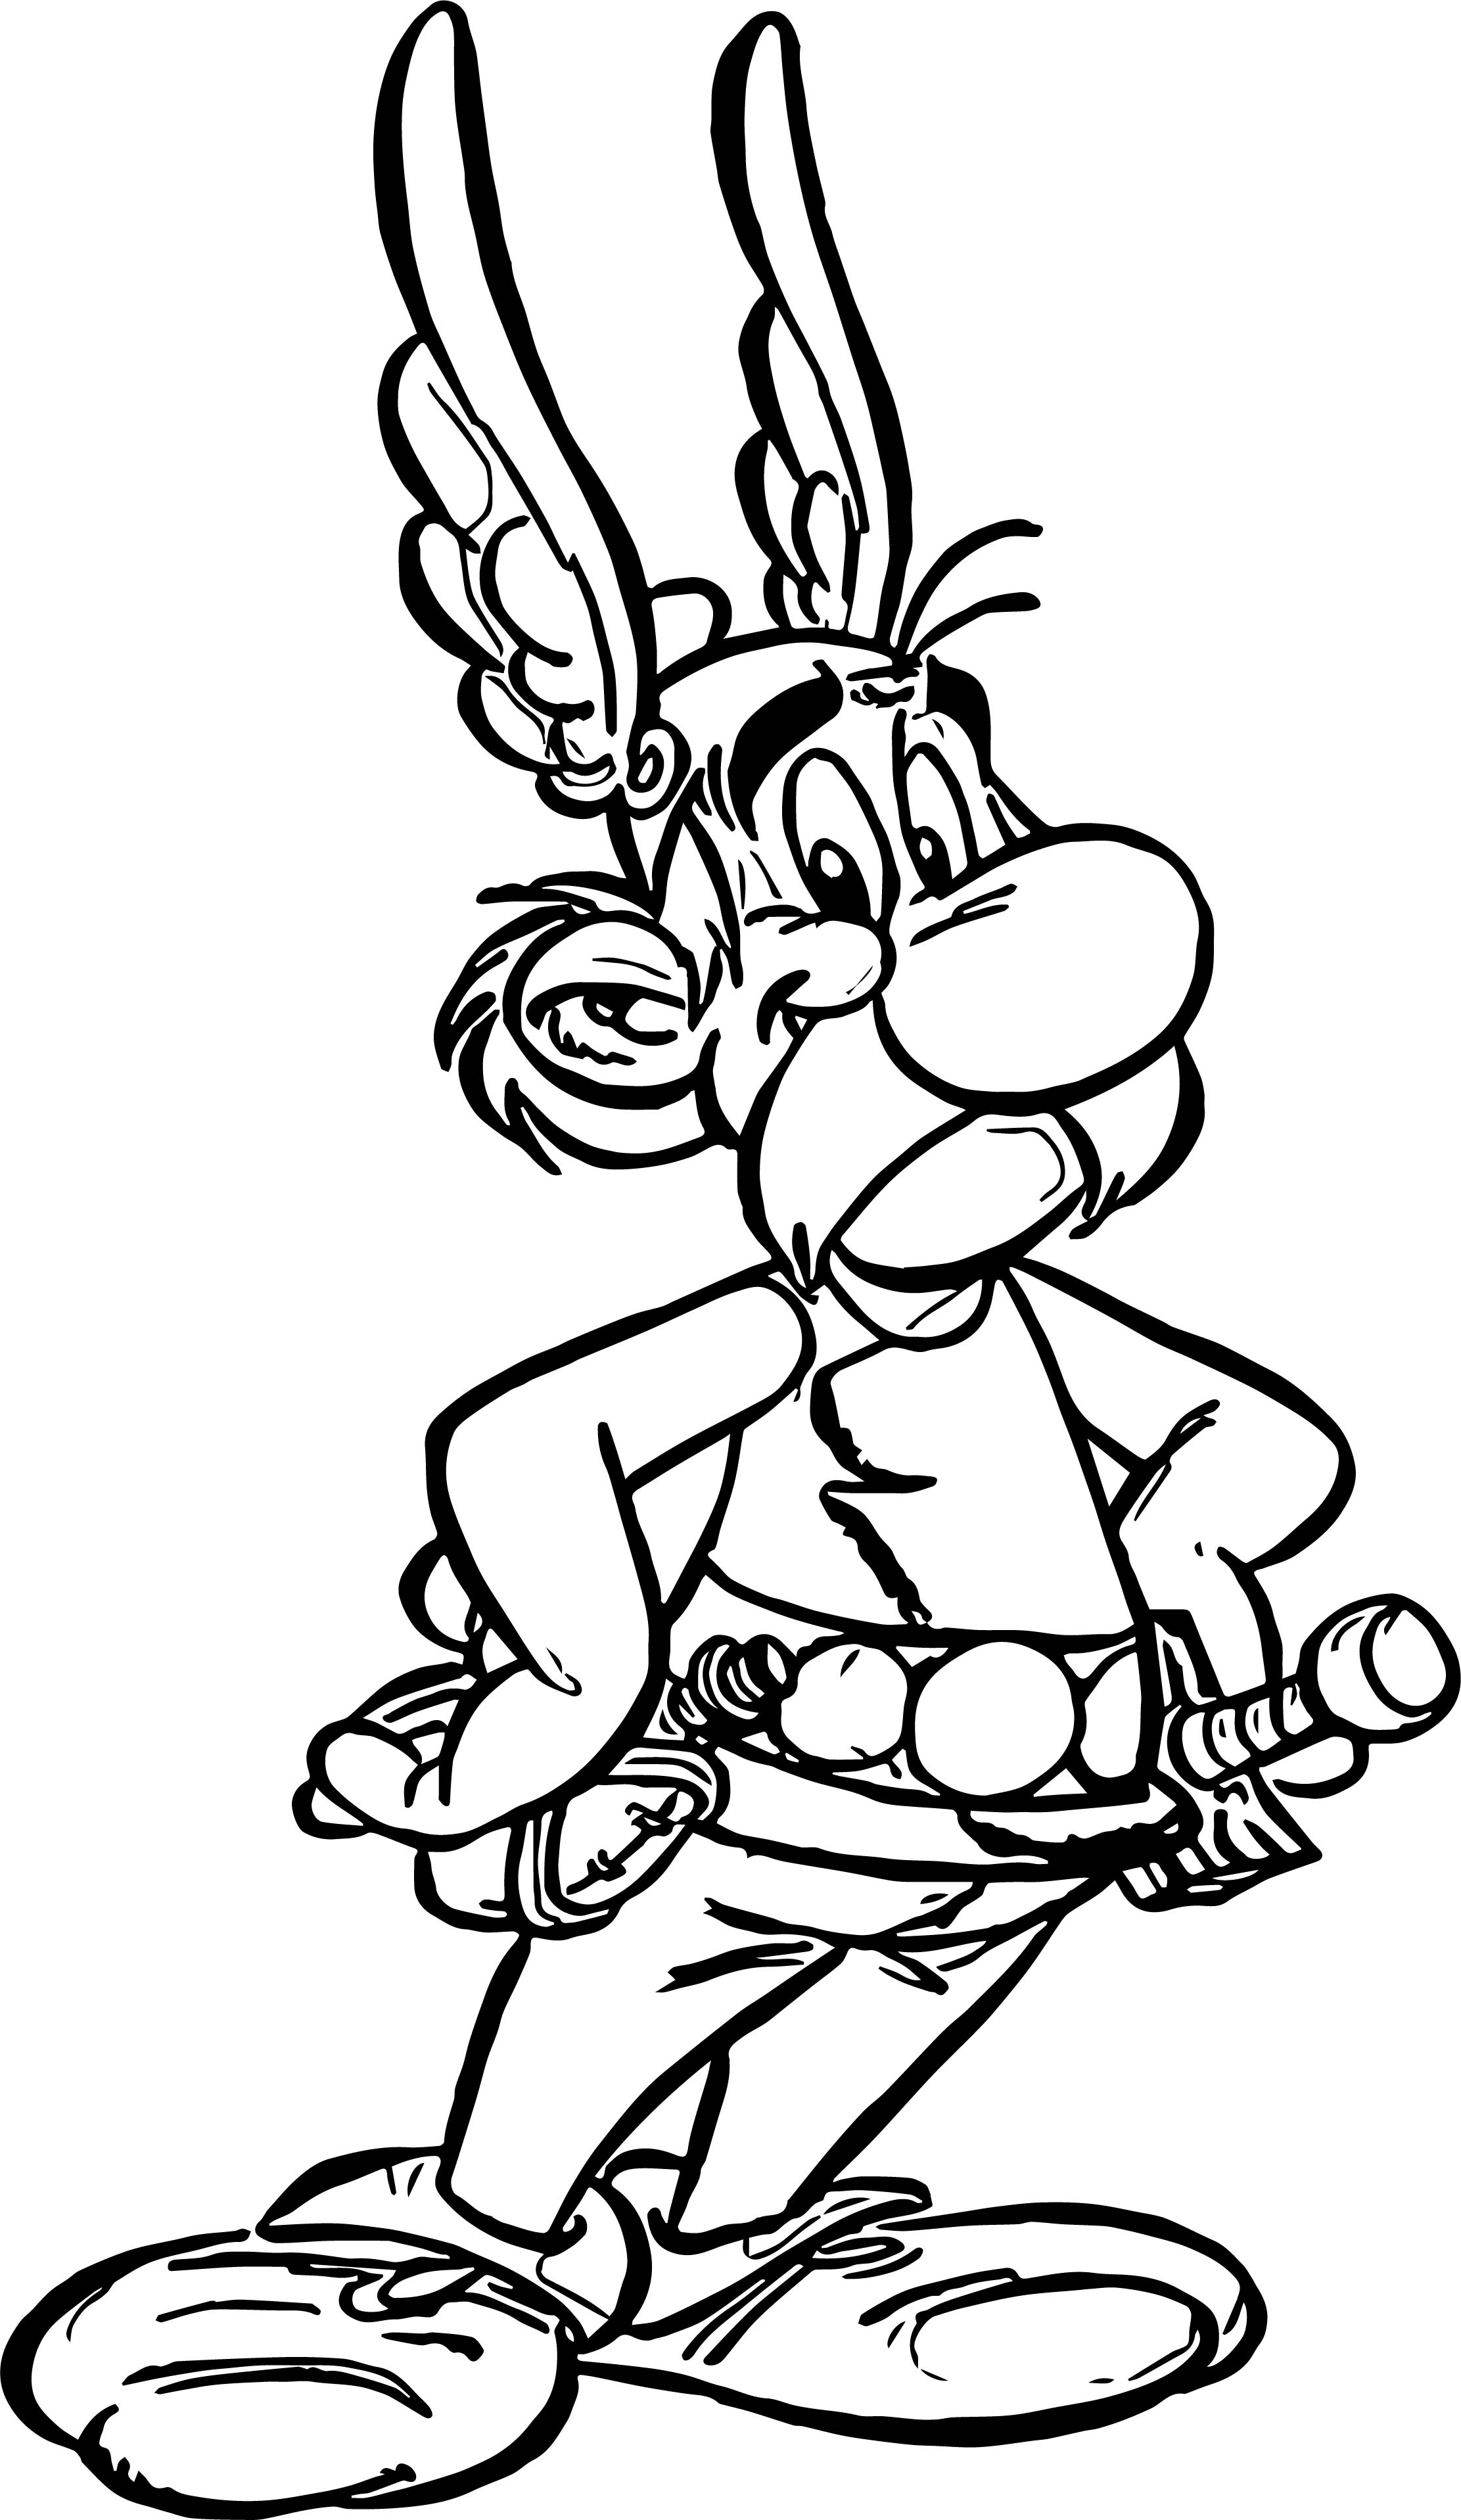 Asterix New Coloring Page – Wecoloringpage.com